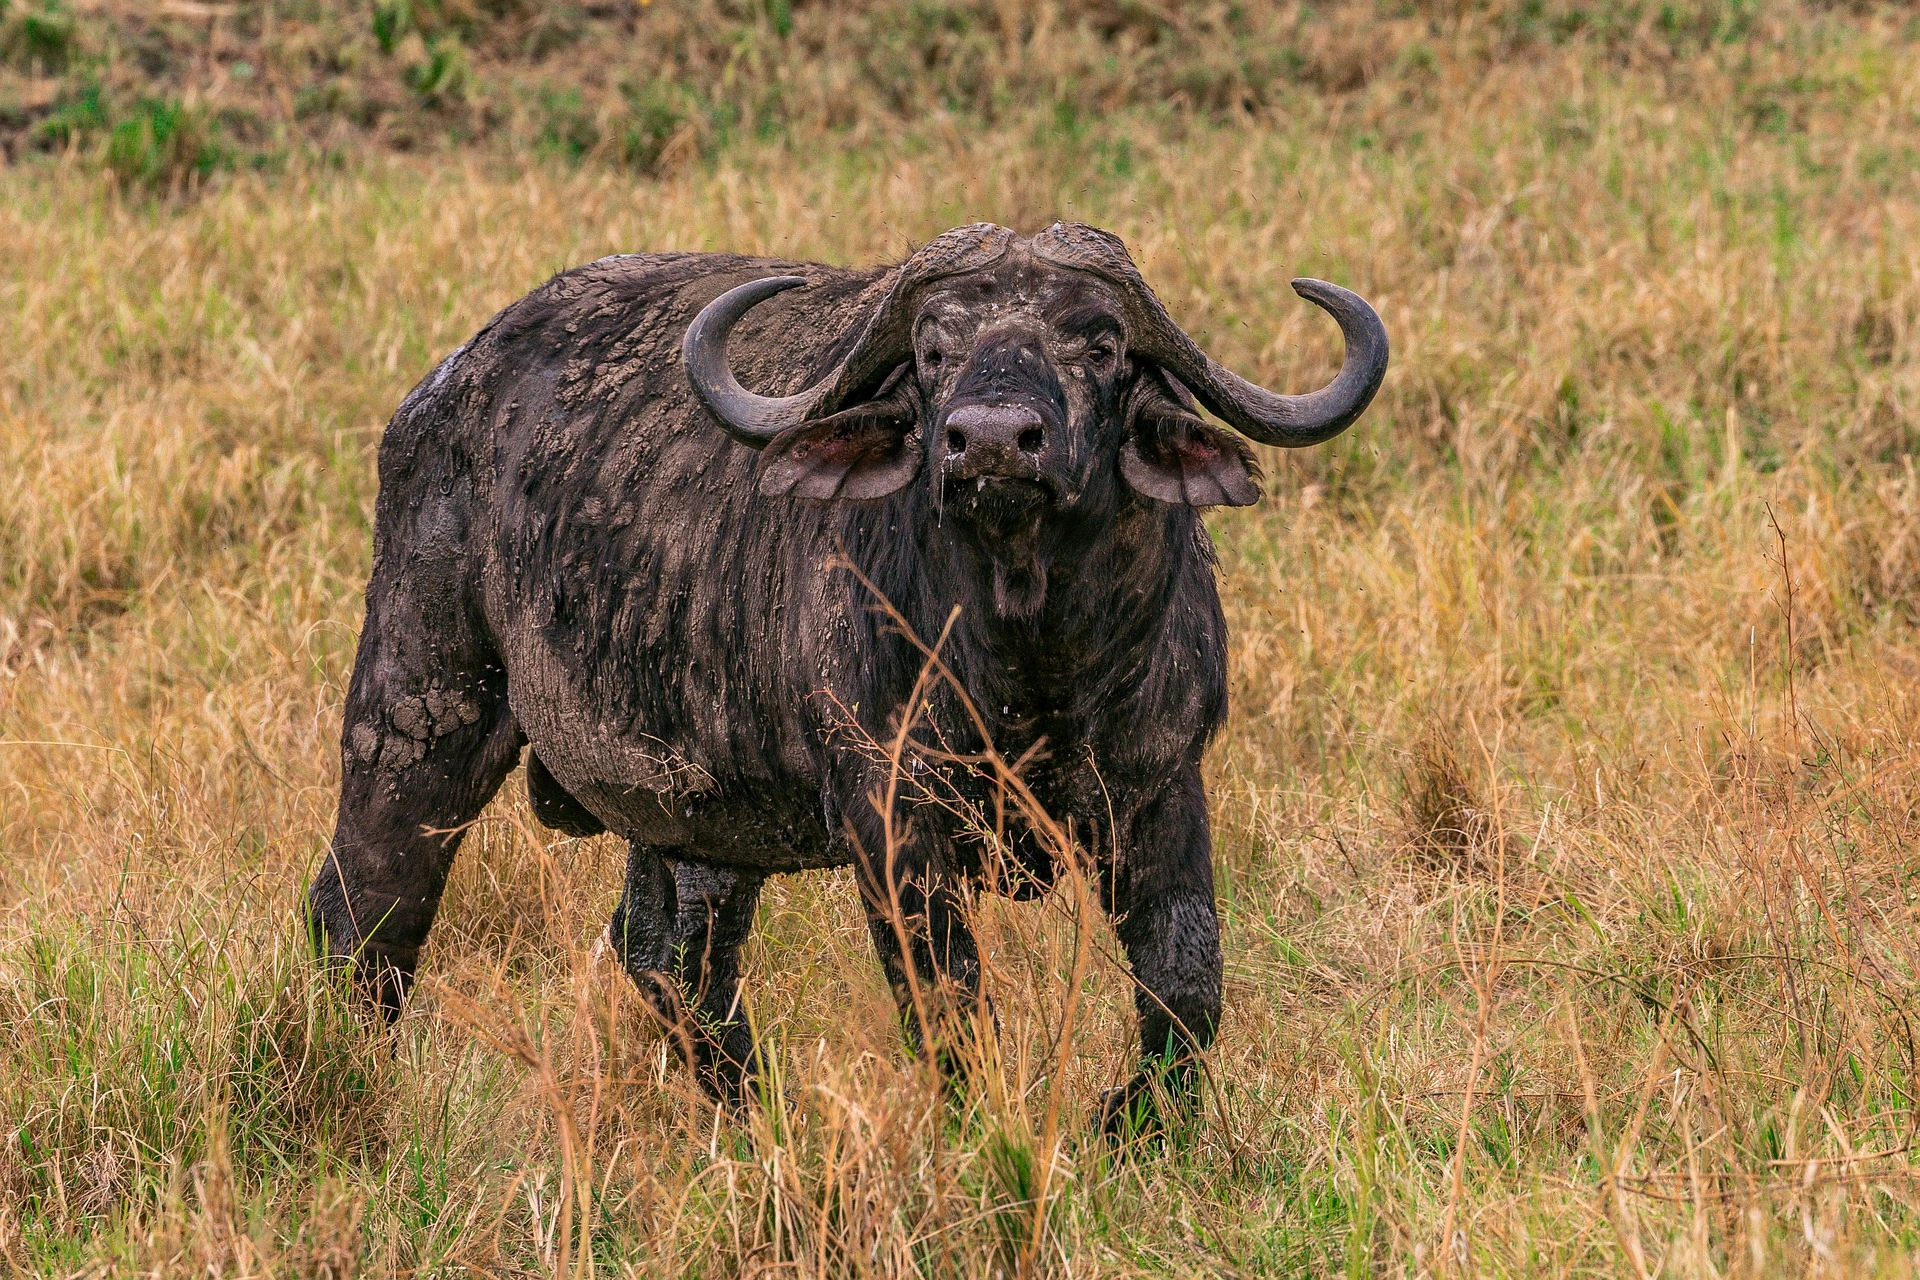 Kenya Safari Packages - Buffalo spotted during game drives in Tsavo West Natinal Park and Tsavo East National parks